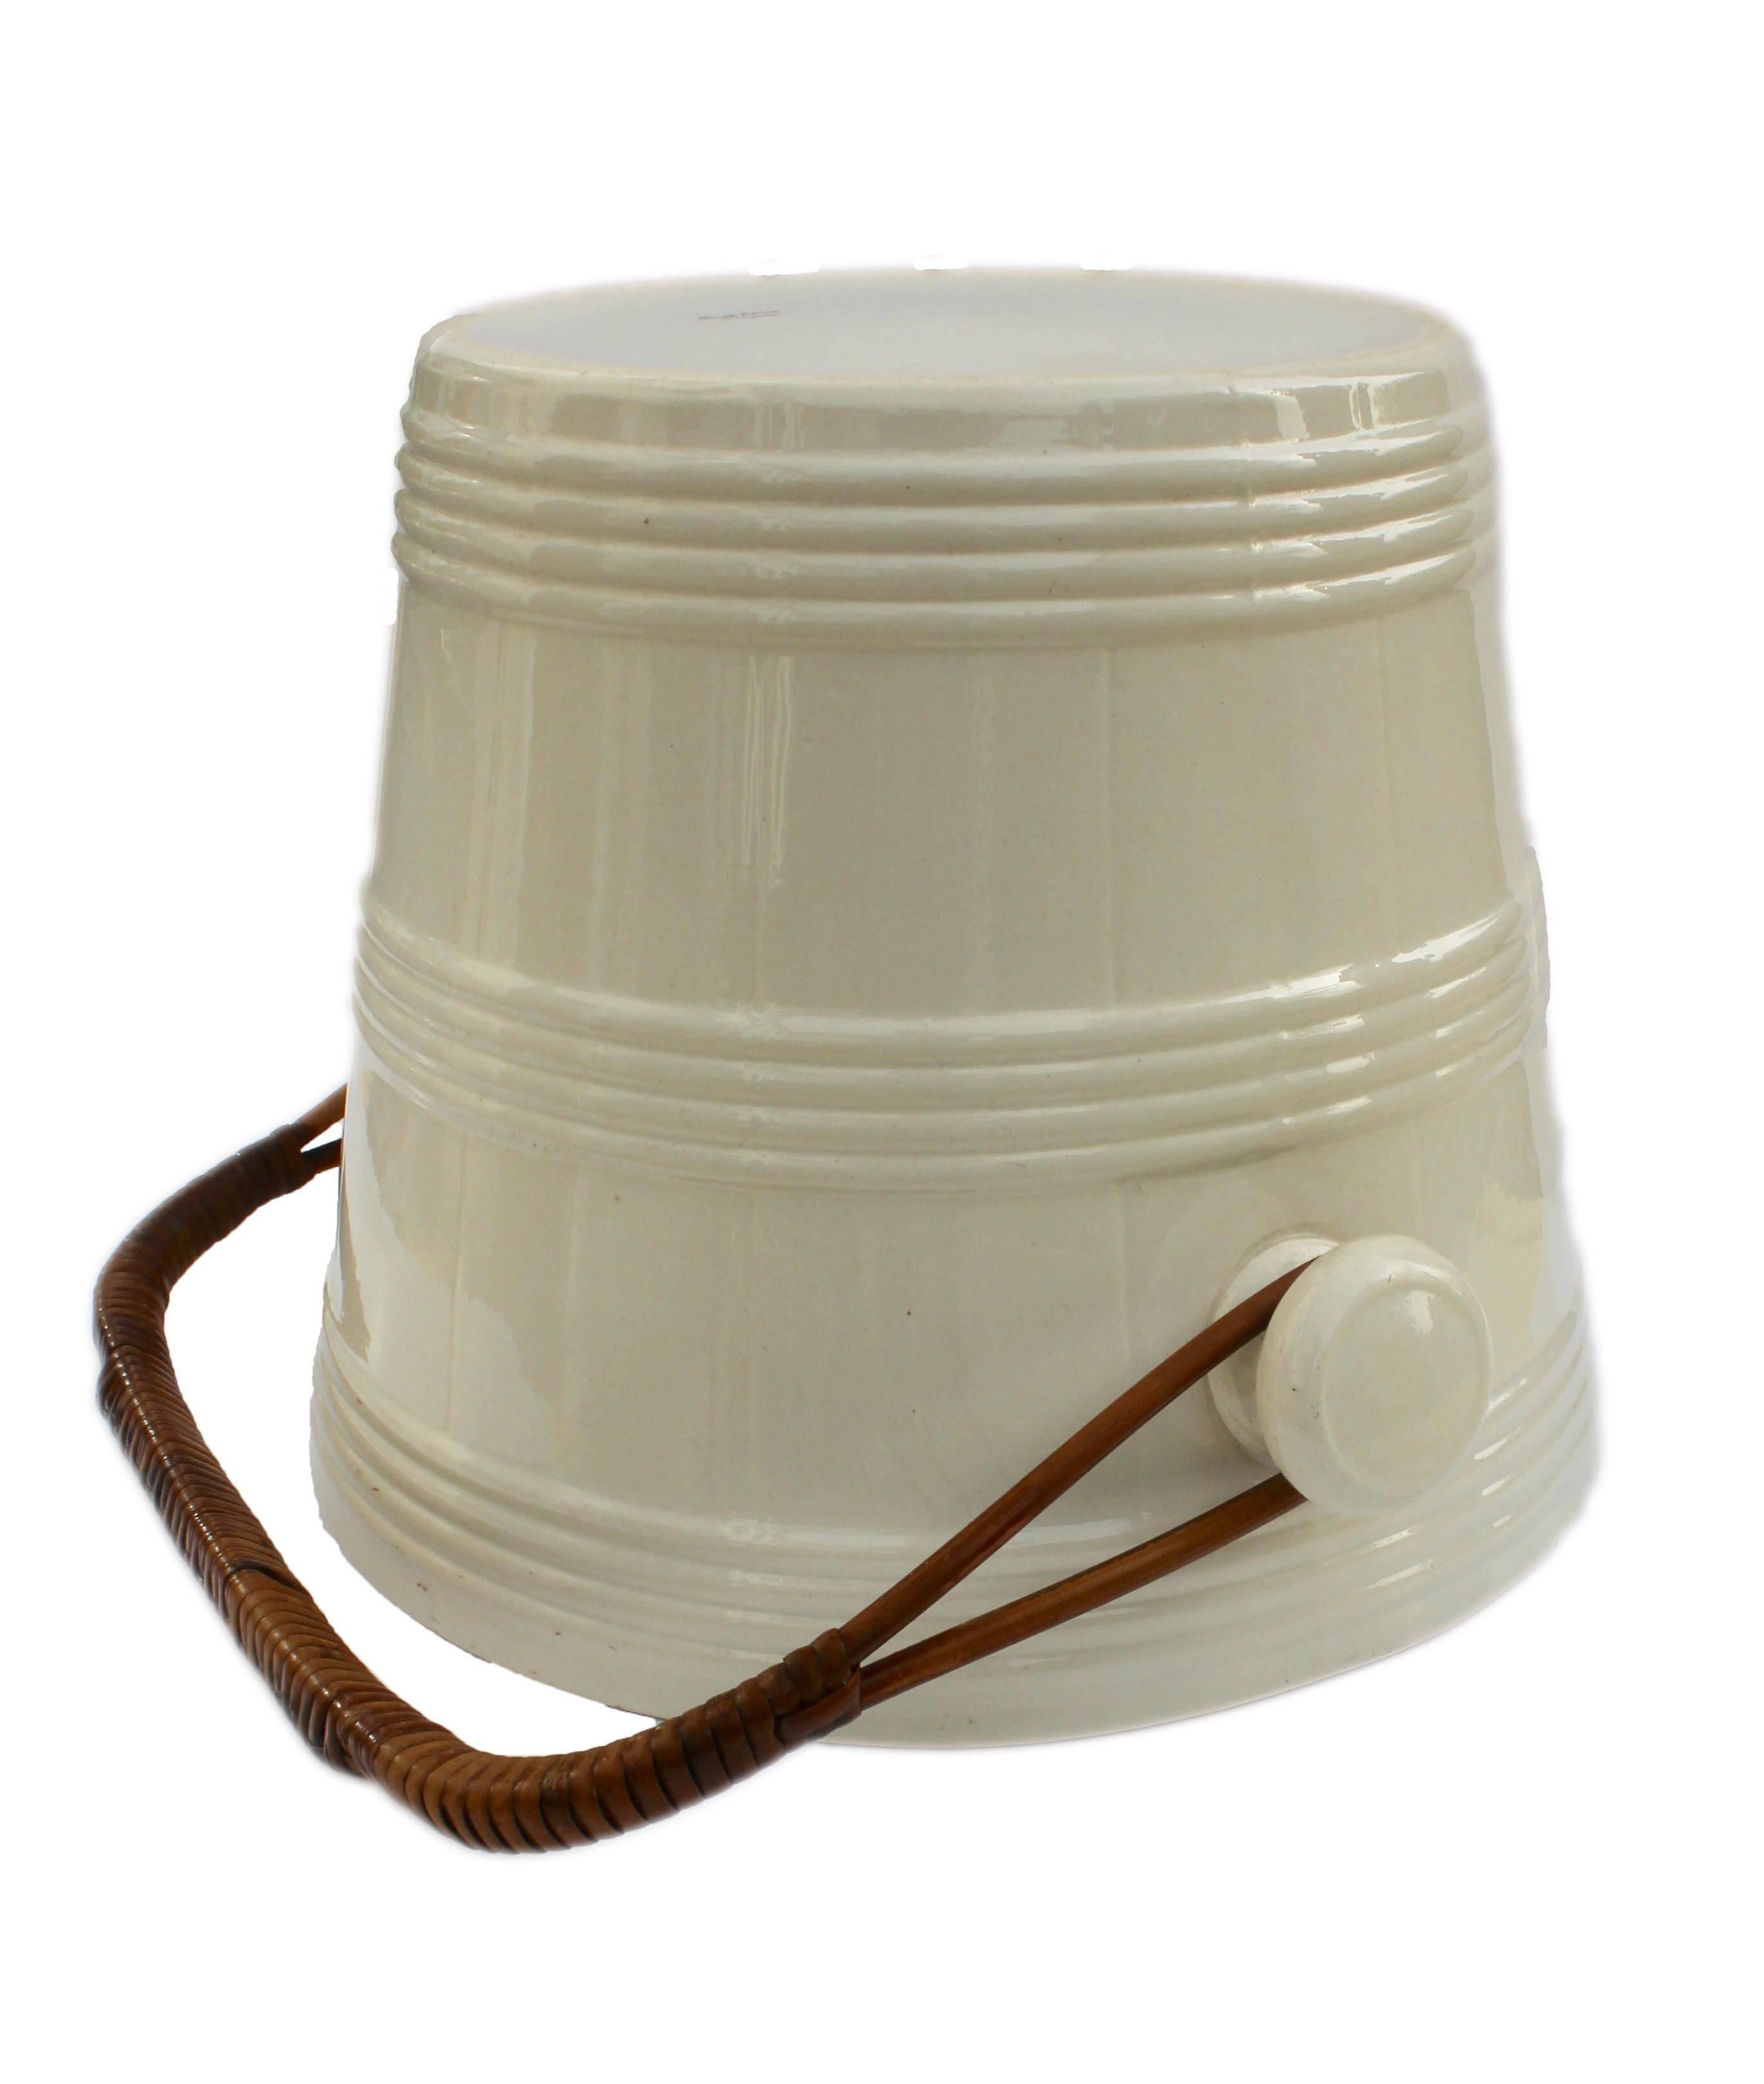 Caning Early Boch Freres Creamware Ice Bucket; with Earliest Mark, Belgium, circa 1841